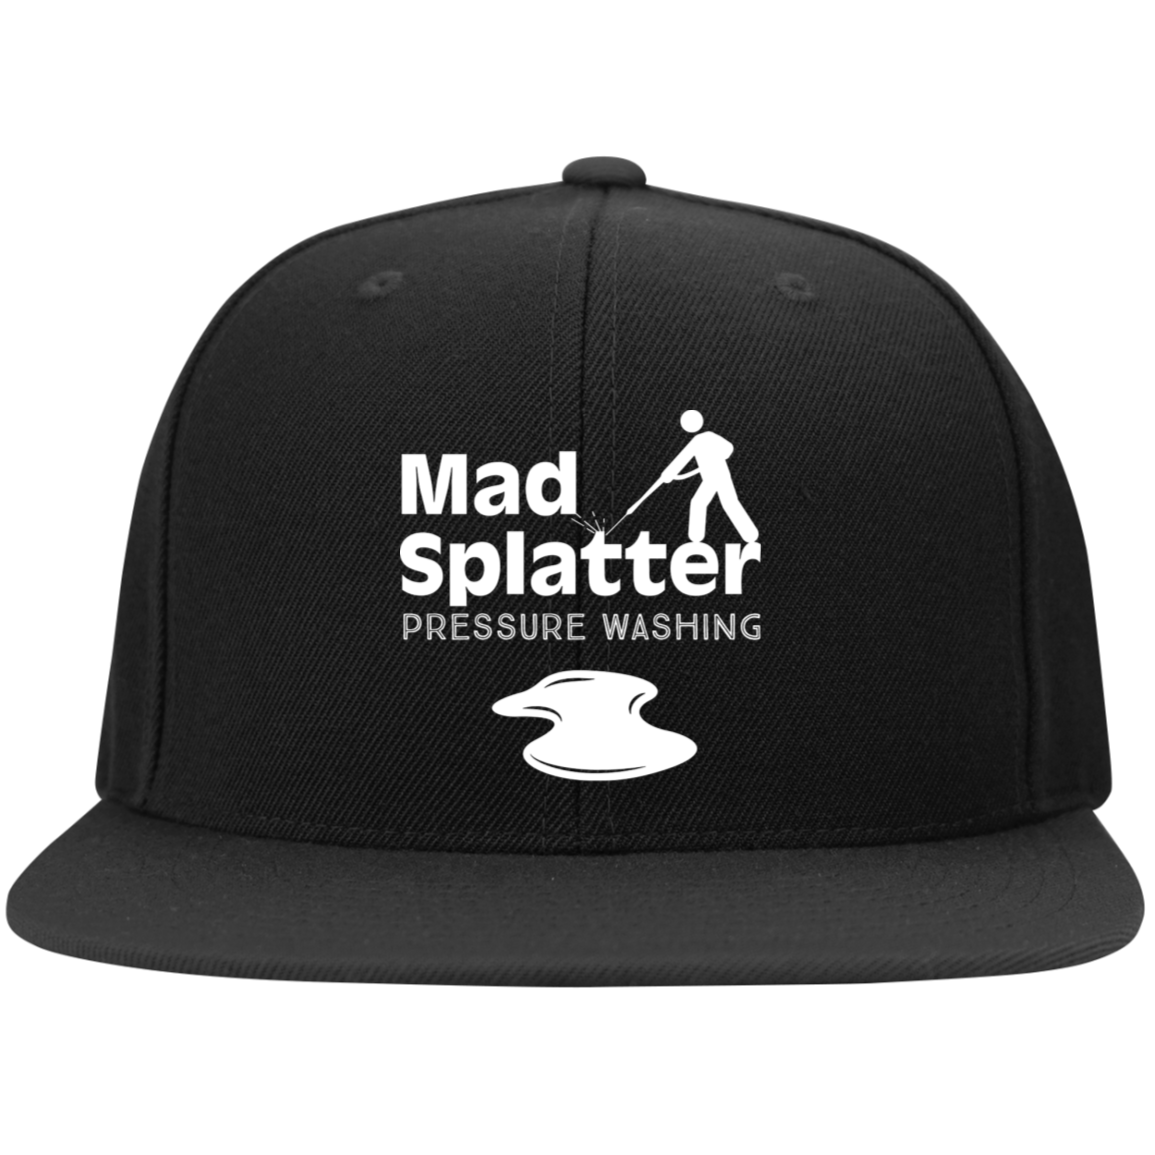 Mad Splatter White Mid Logo Trans STC19 Embroidered Flat Bill High-Profile Snapback Hat